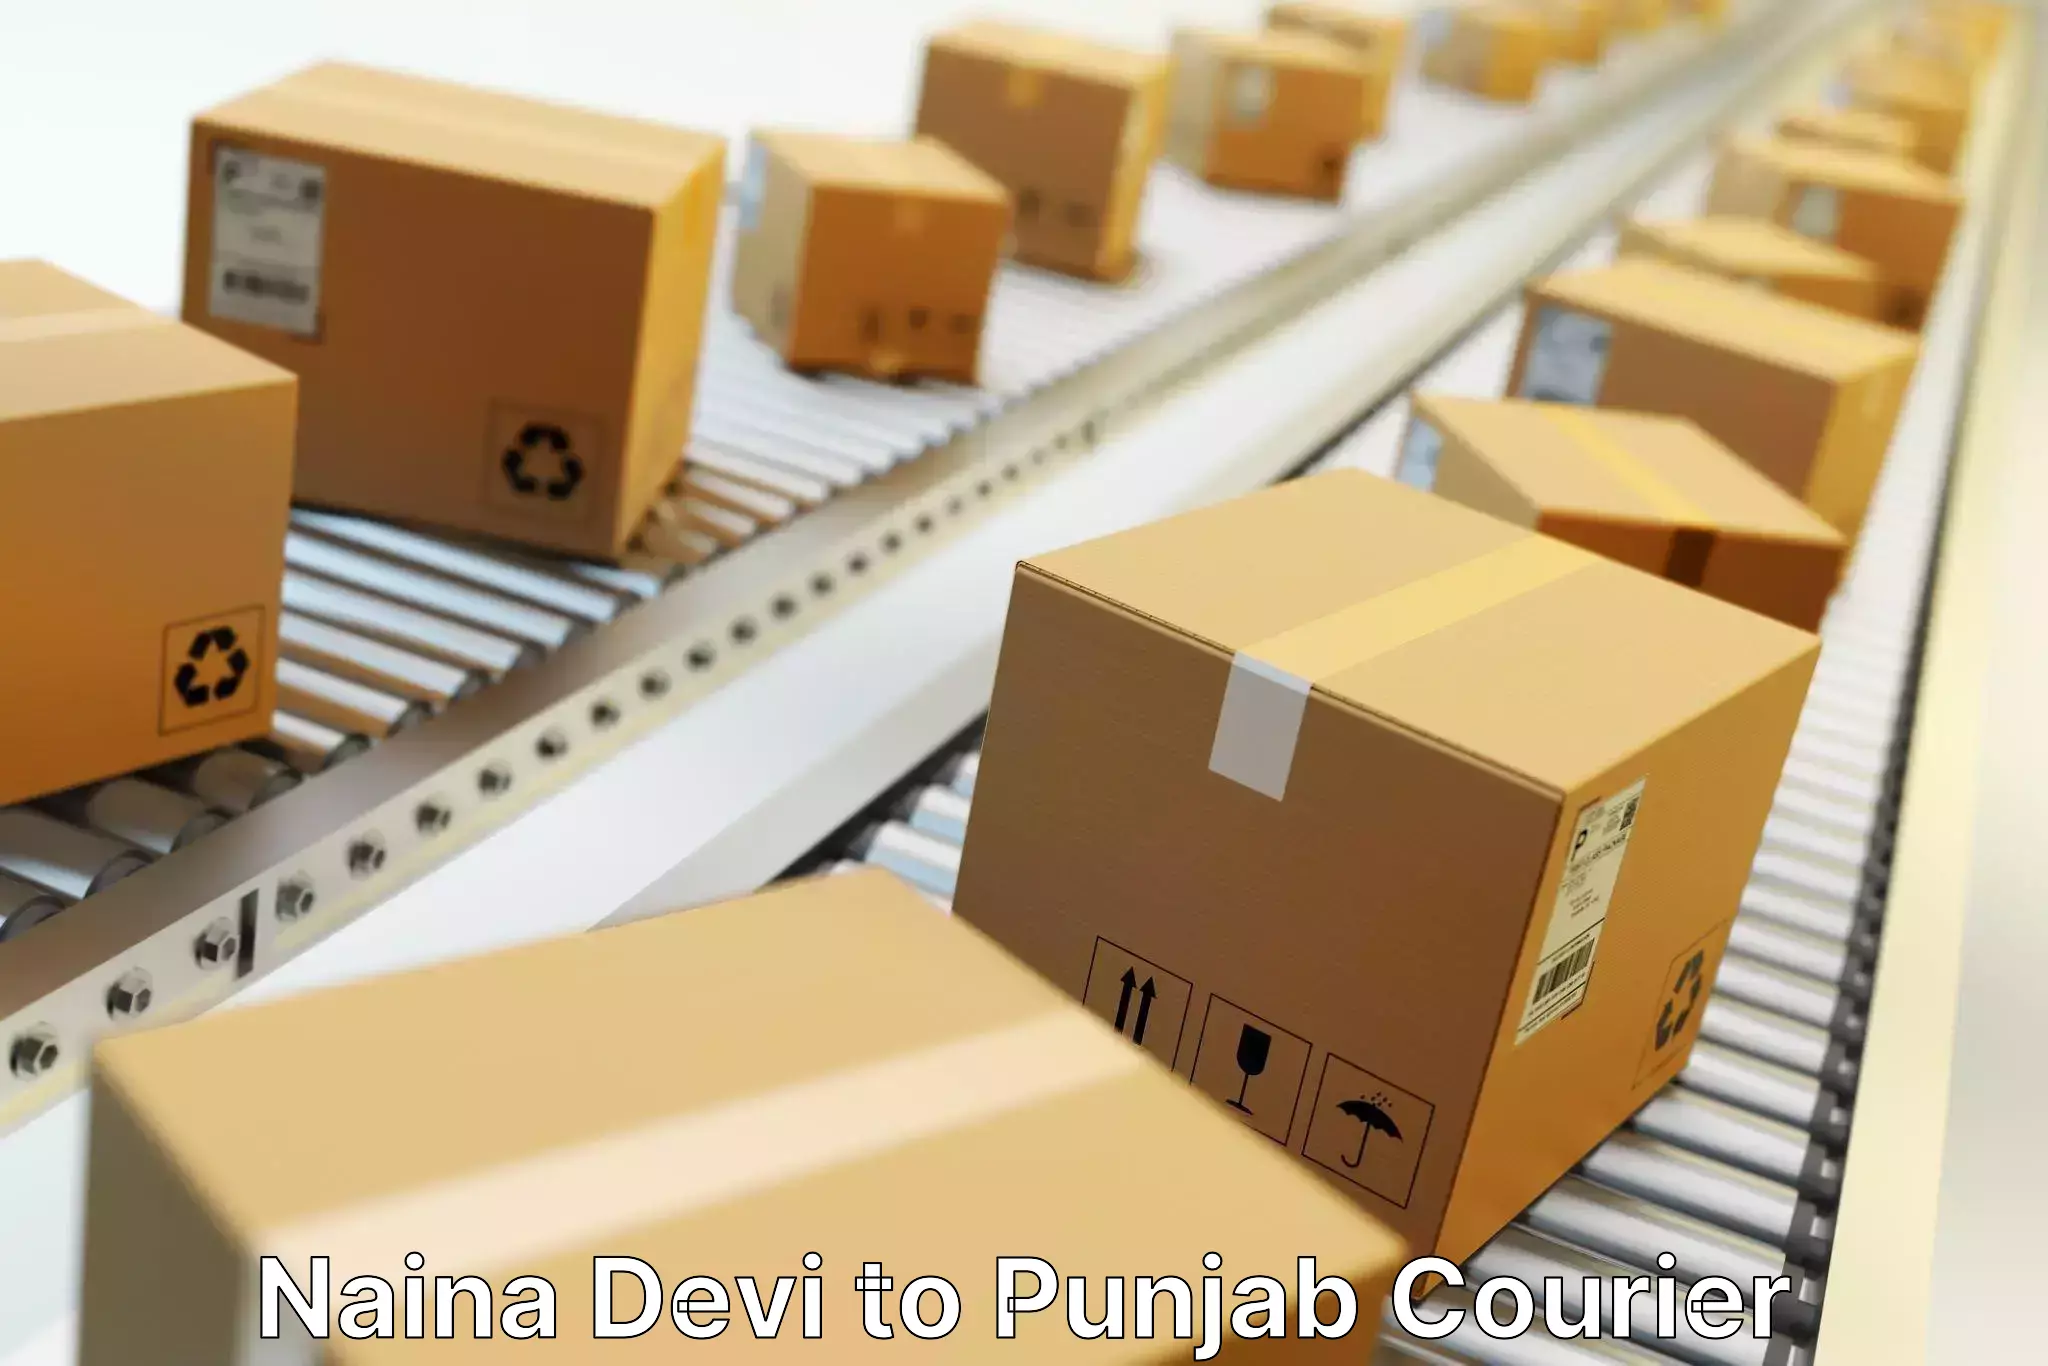 Optimized delivery routes Naina Devi to Amritsar